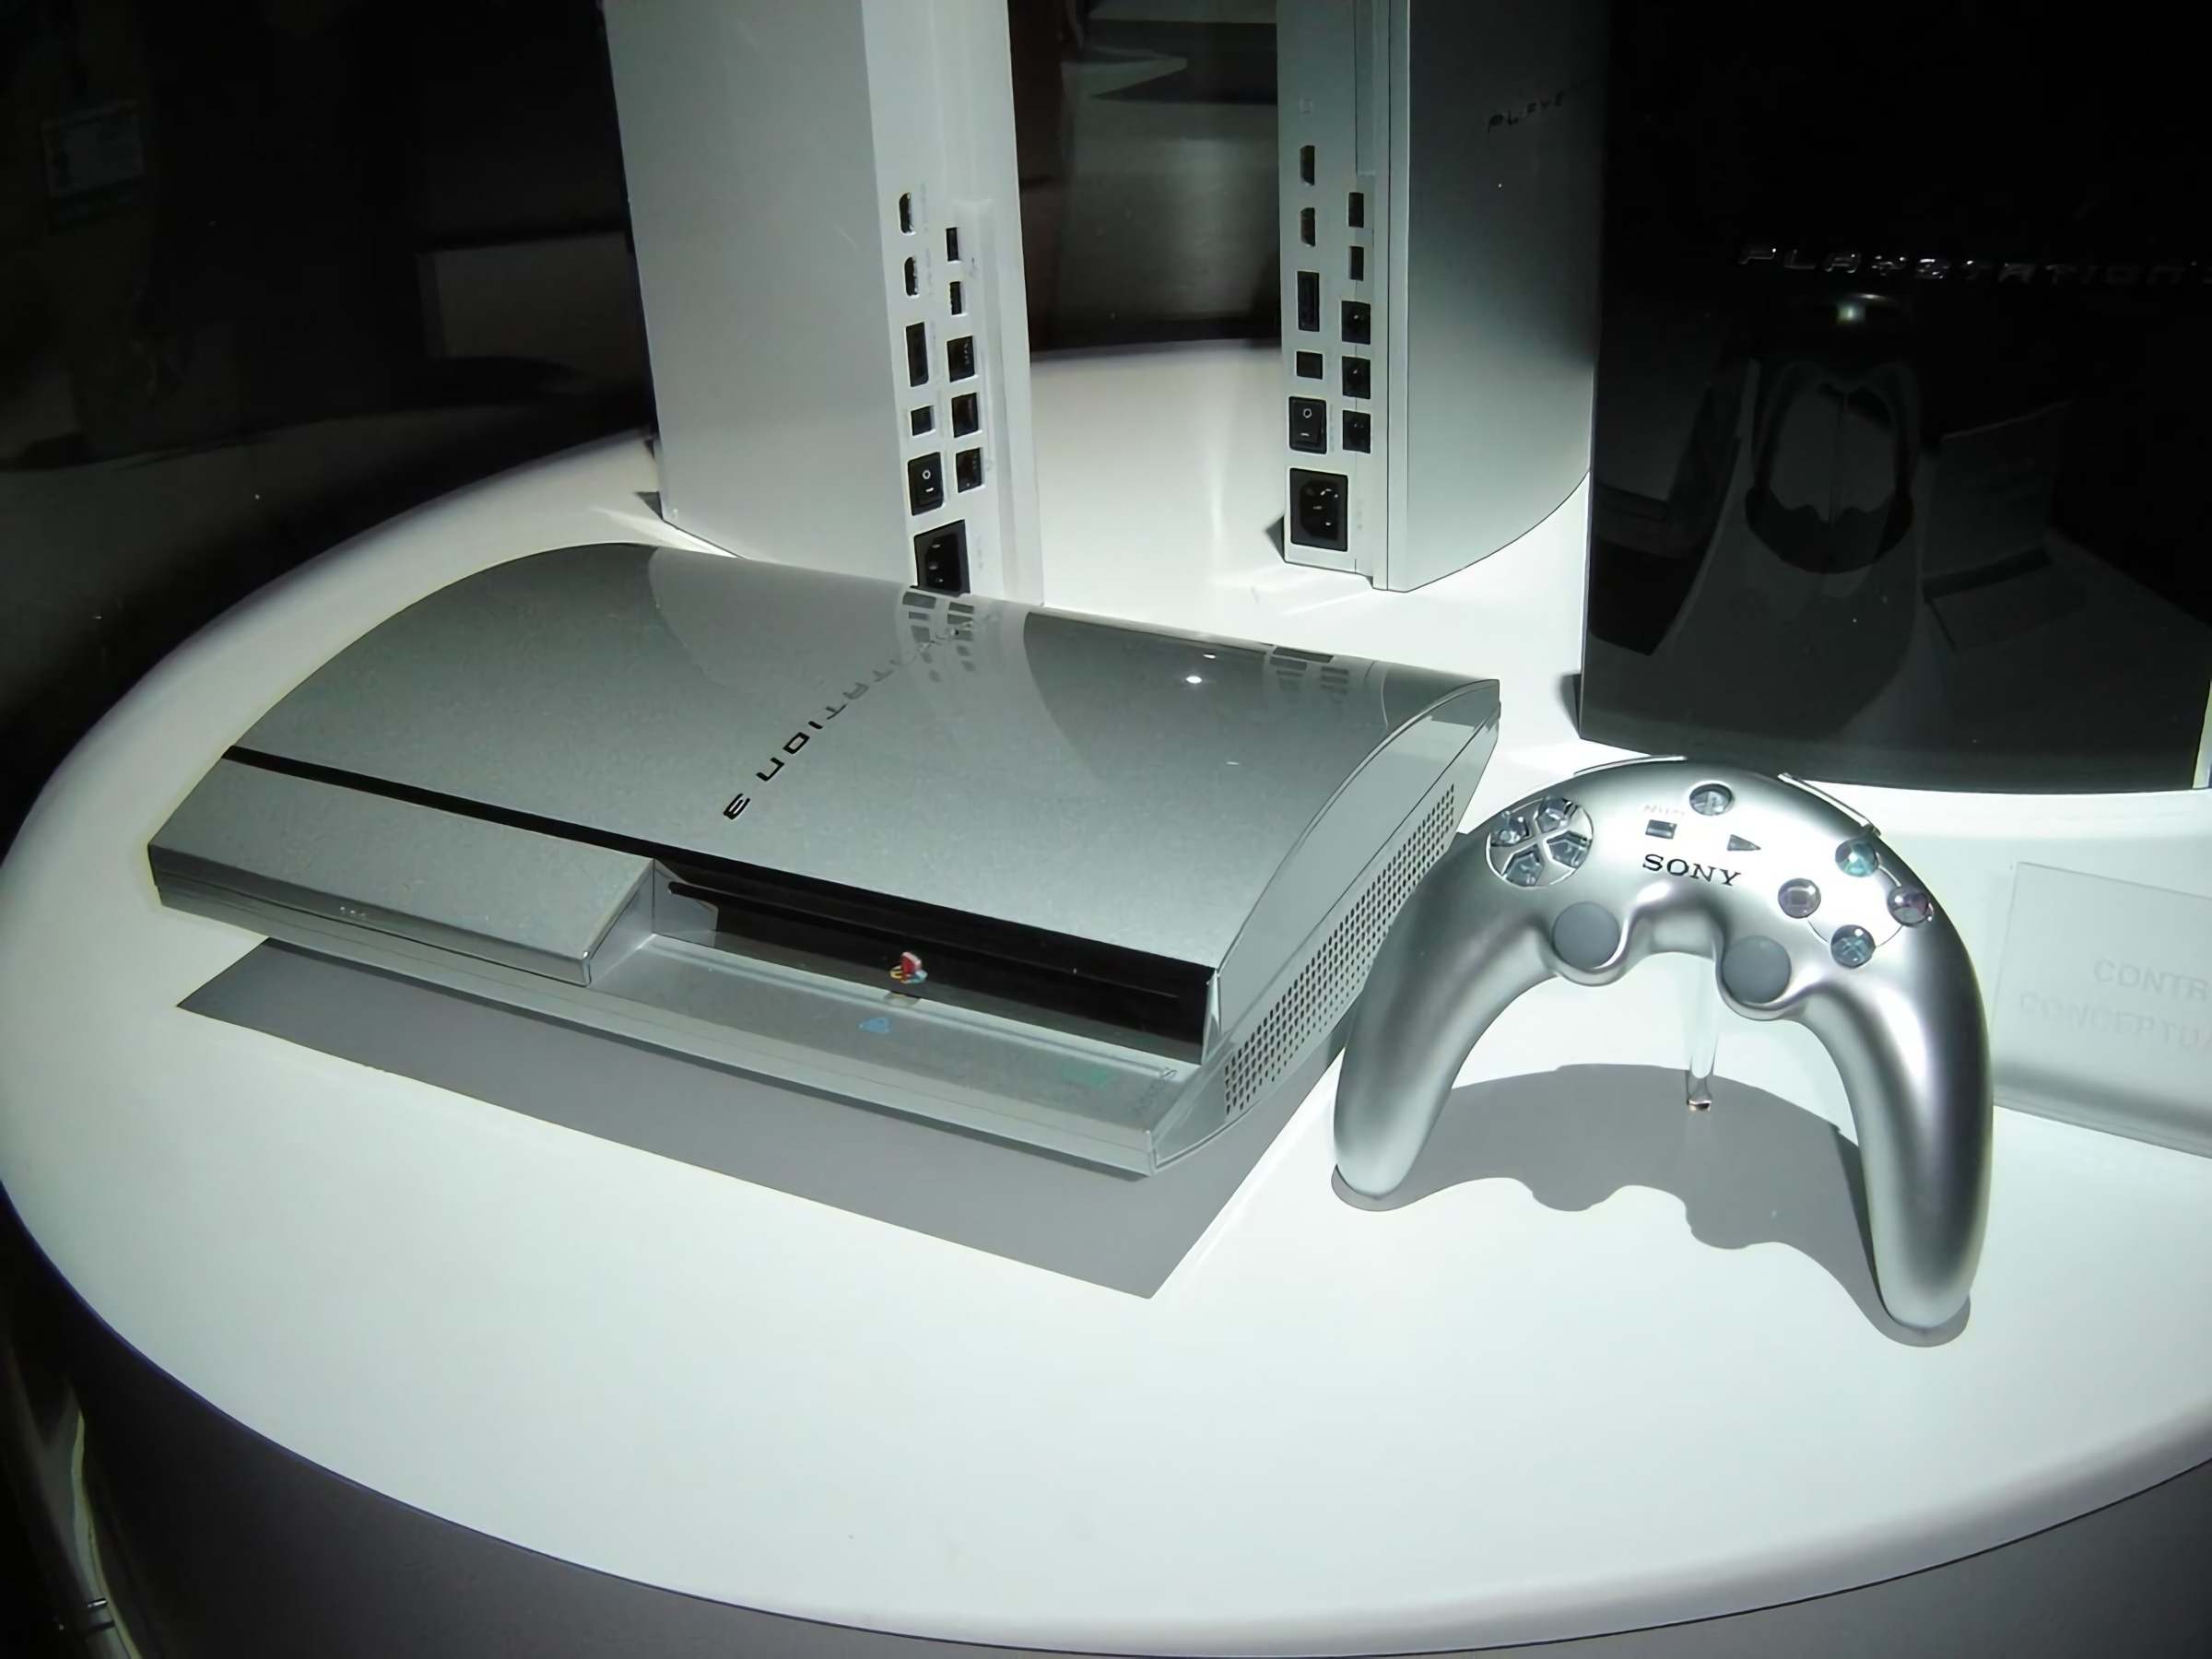 Ps3 versions. Sony ps3 Silver. PLAYSTATION 3 Console Prototype. Sony ps1 DEVKIT. Ps3 контроллер Бумеранг.